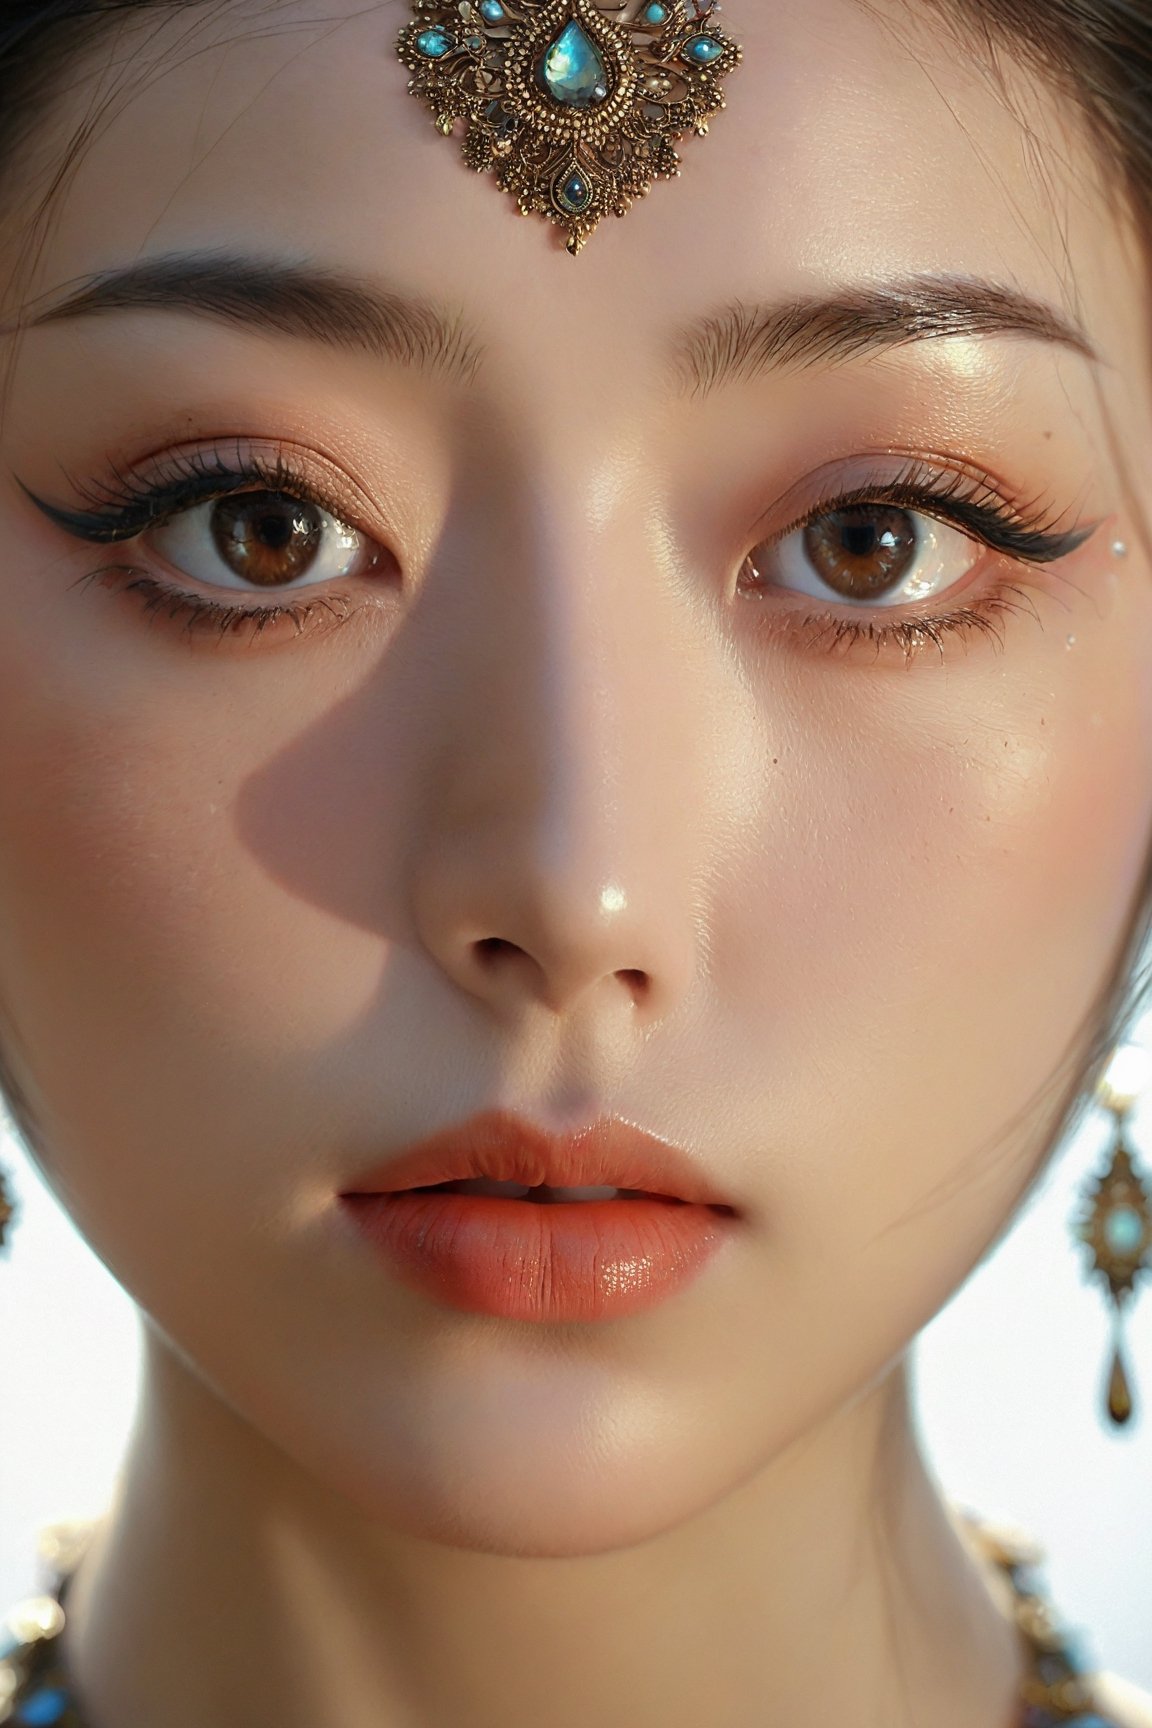 (Masterpiece, Top Quality, Best Quality, Official Art, Beauty and Aesthetics: 1.2), (1 Oriental Girl Sad Sad Frontal Facial Expression), Nano Detailed, (Abstract, Fractal Art: 1.3), Highest Detailed, Detailed eyes, few remaining teardrops on face, bare shoulders, sexy lips, pronounced contours